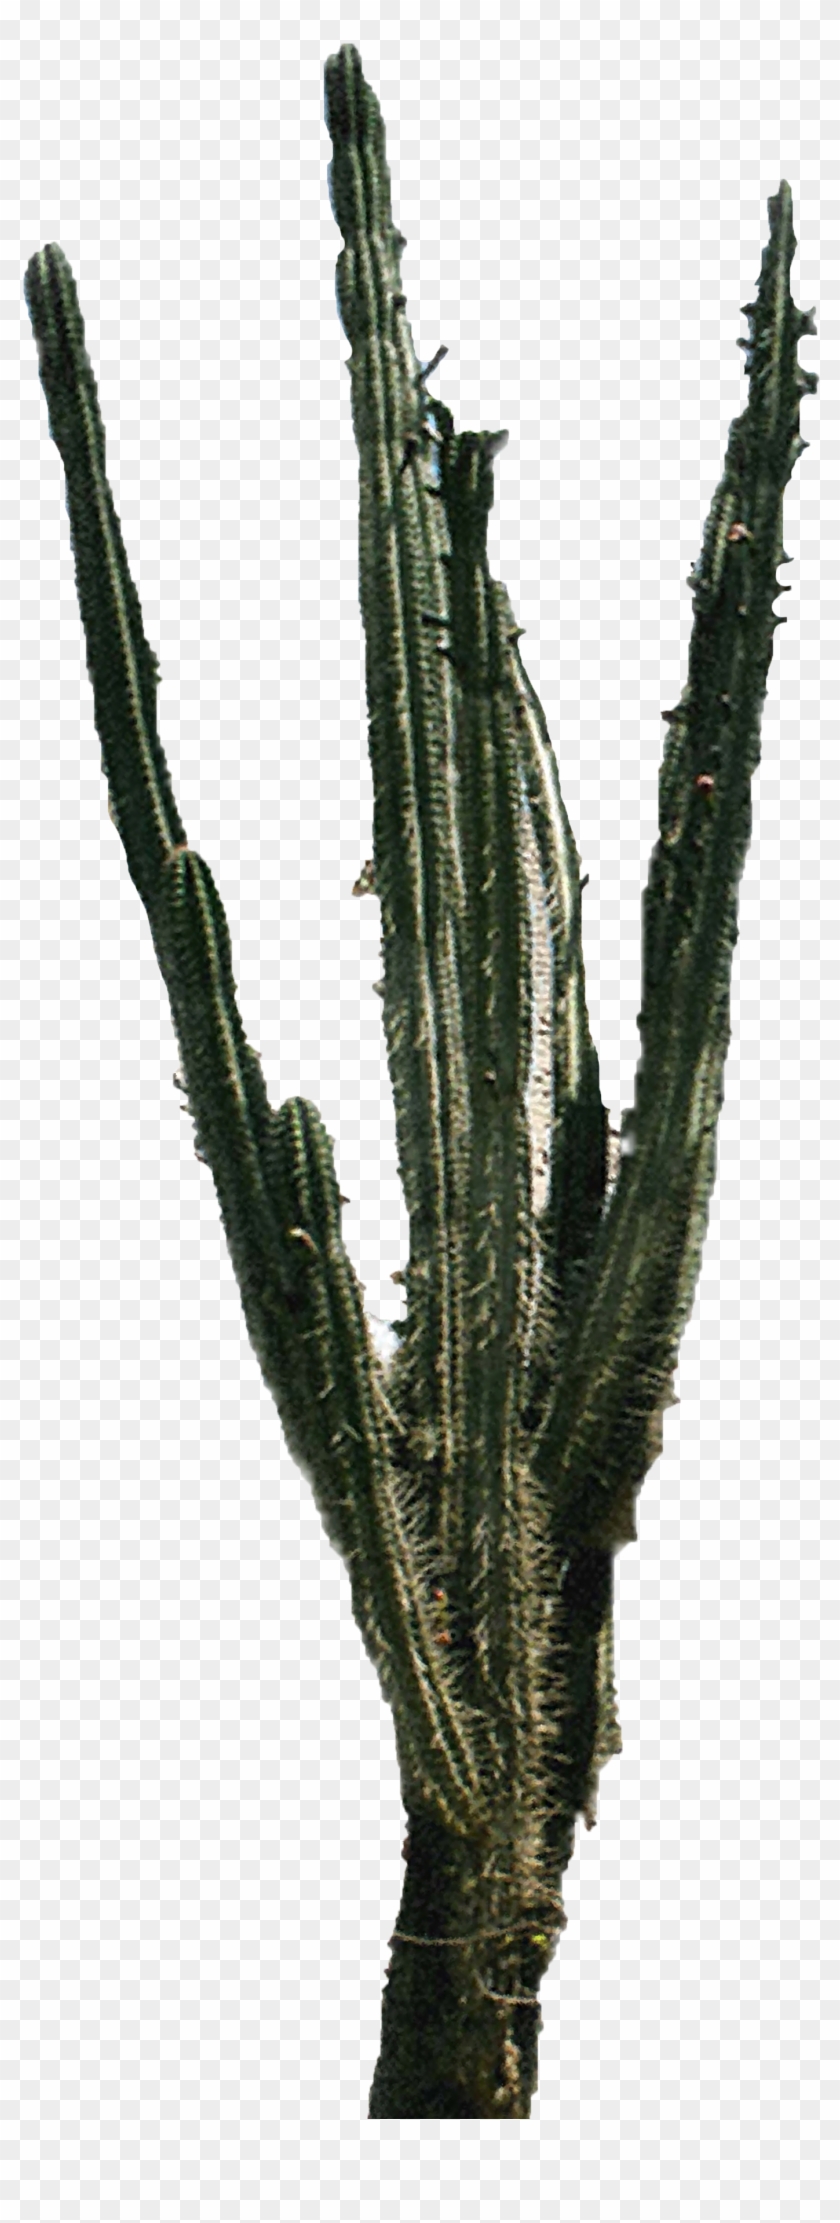 Download Free High-quality Cactus Png Transparent Images - Portable Network Graphics #1059760